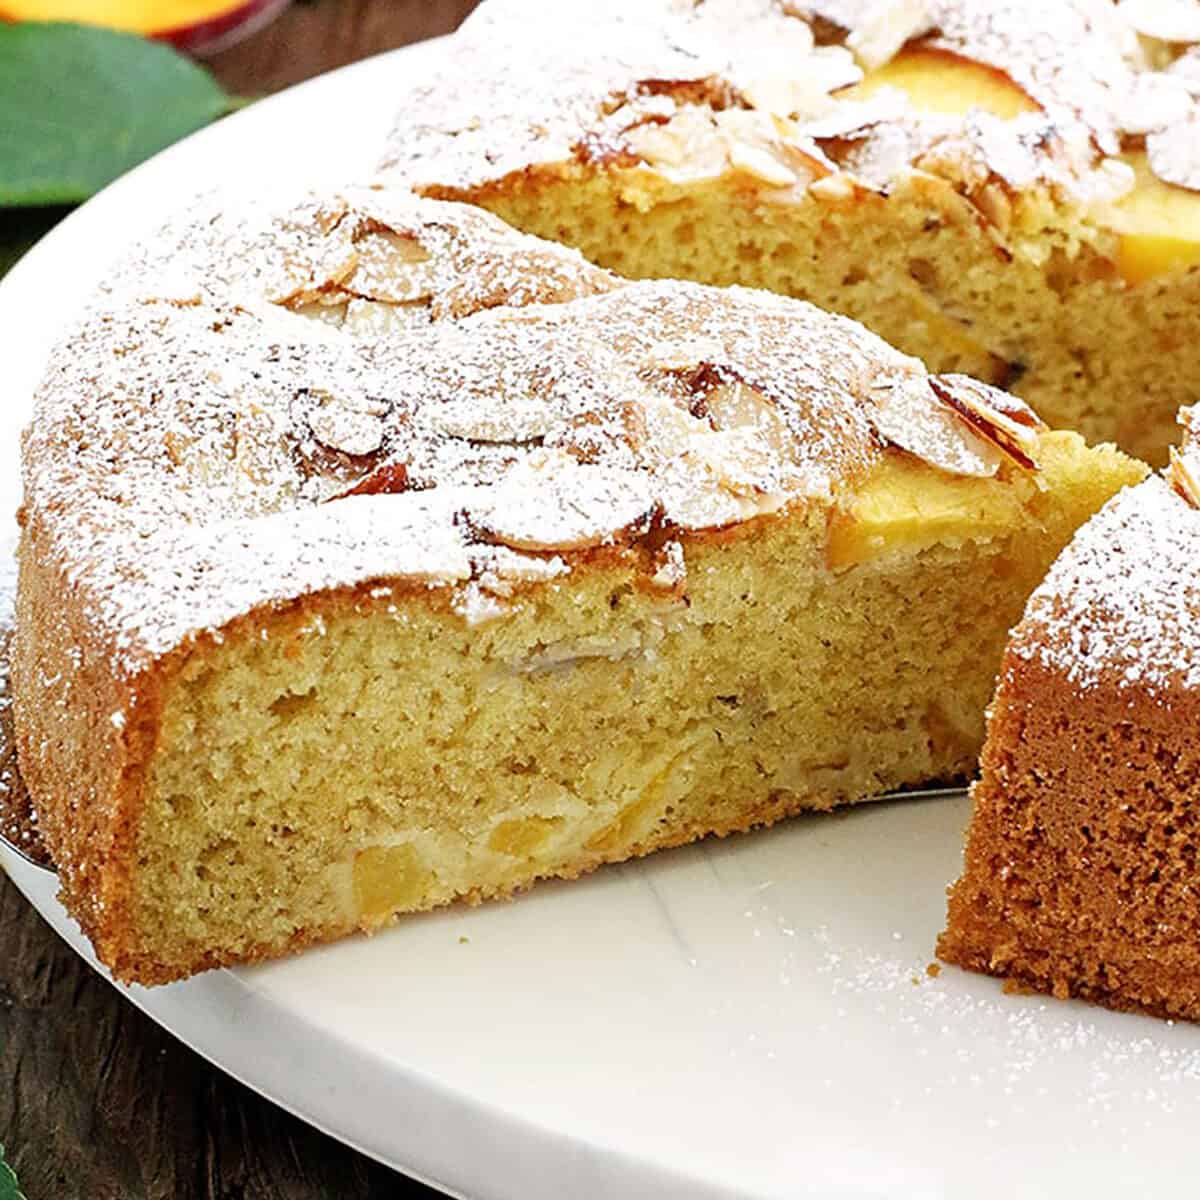 Fluffy cake with a moist crumb, loaded with peaches and topped with almonds, it's the most perfect coffee cake ever!